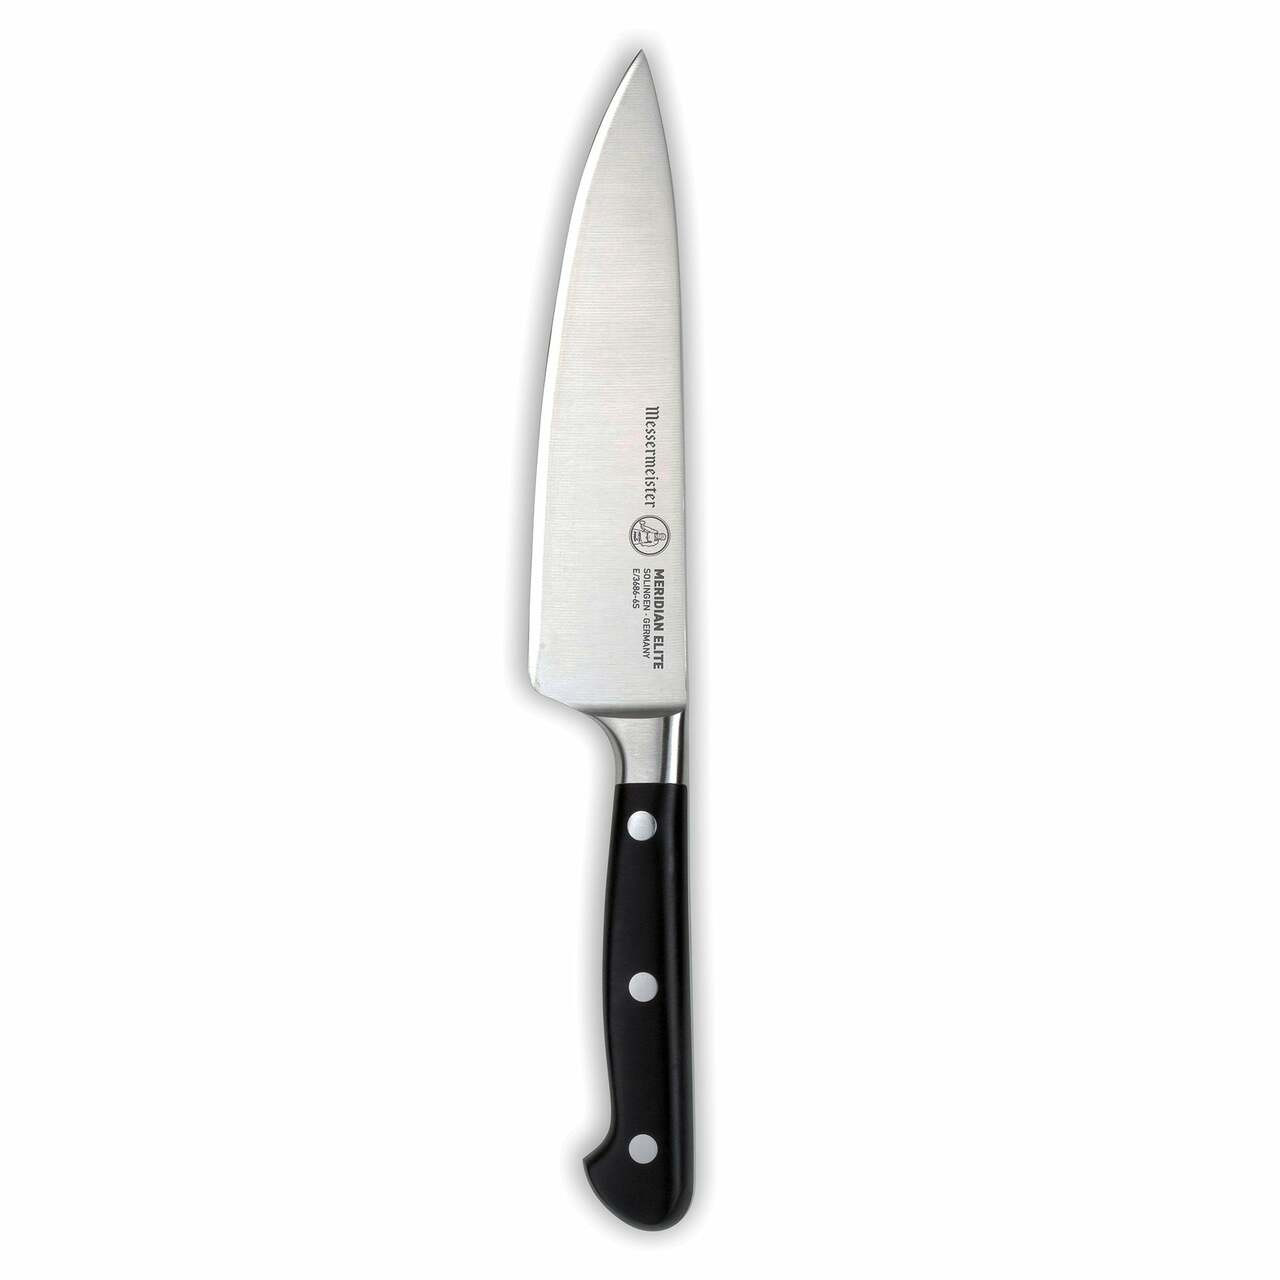 Messermeister Meridian Elite Stealth 6 Inch Chef's Knife - E/3686-6S -  American Flags & Cutlery